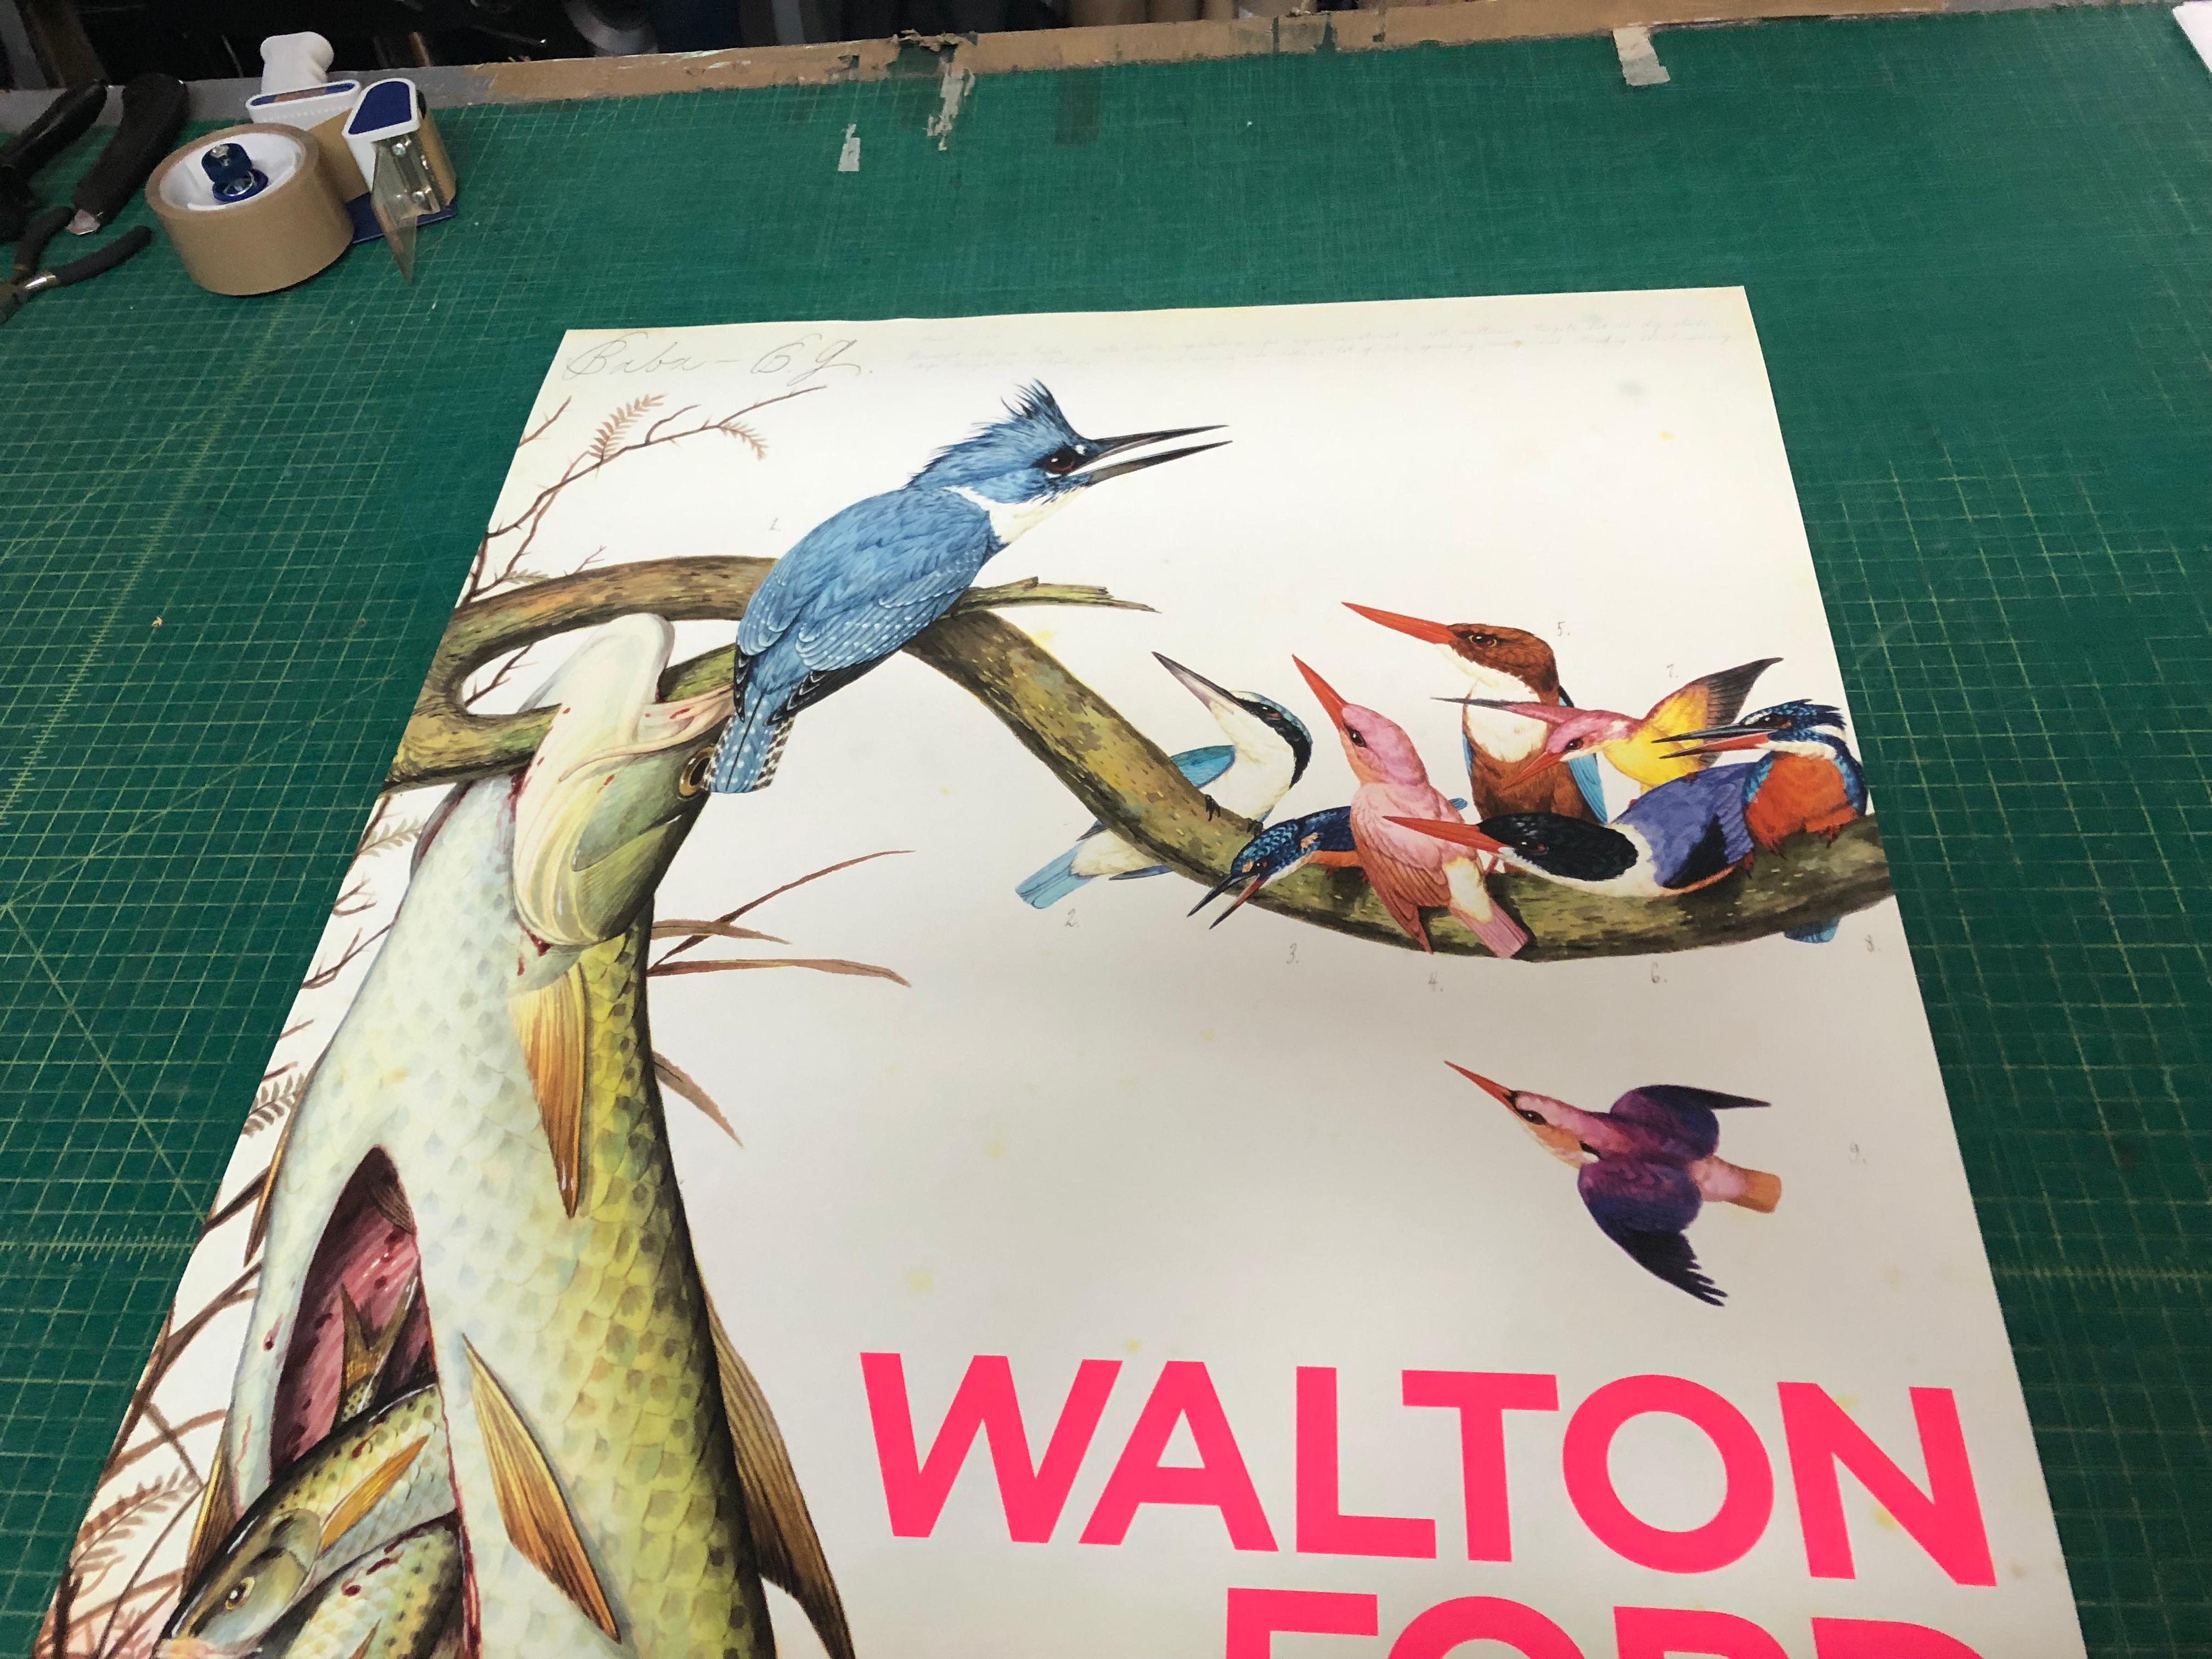 Walton Ford 'Baba' -2010 - Offset Lithograph For Sale 4